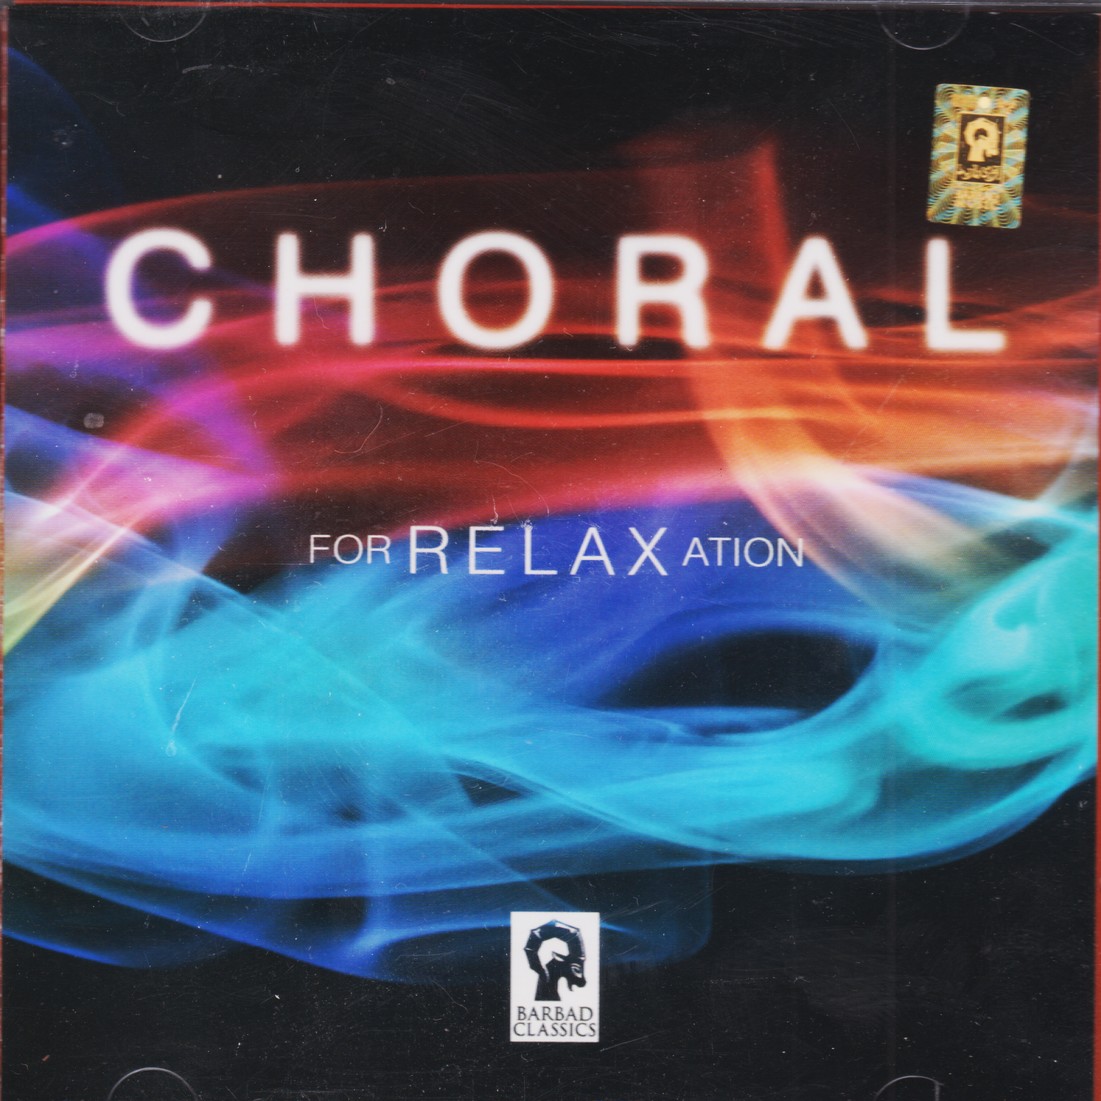 CHORAL for relaxation